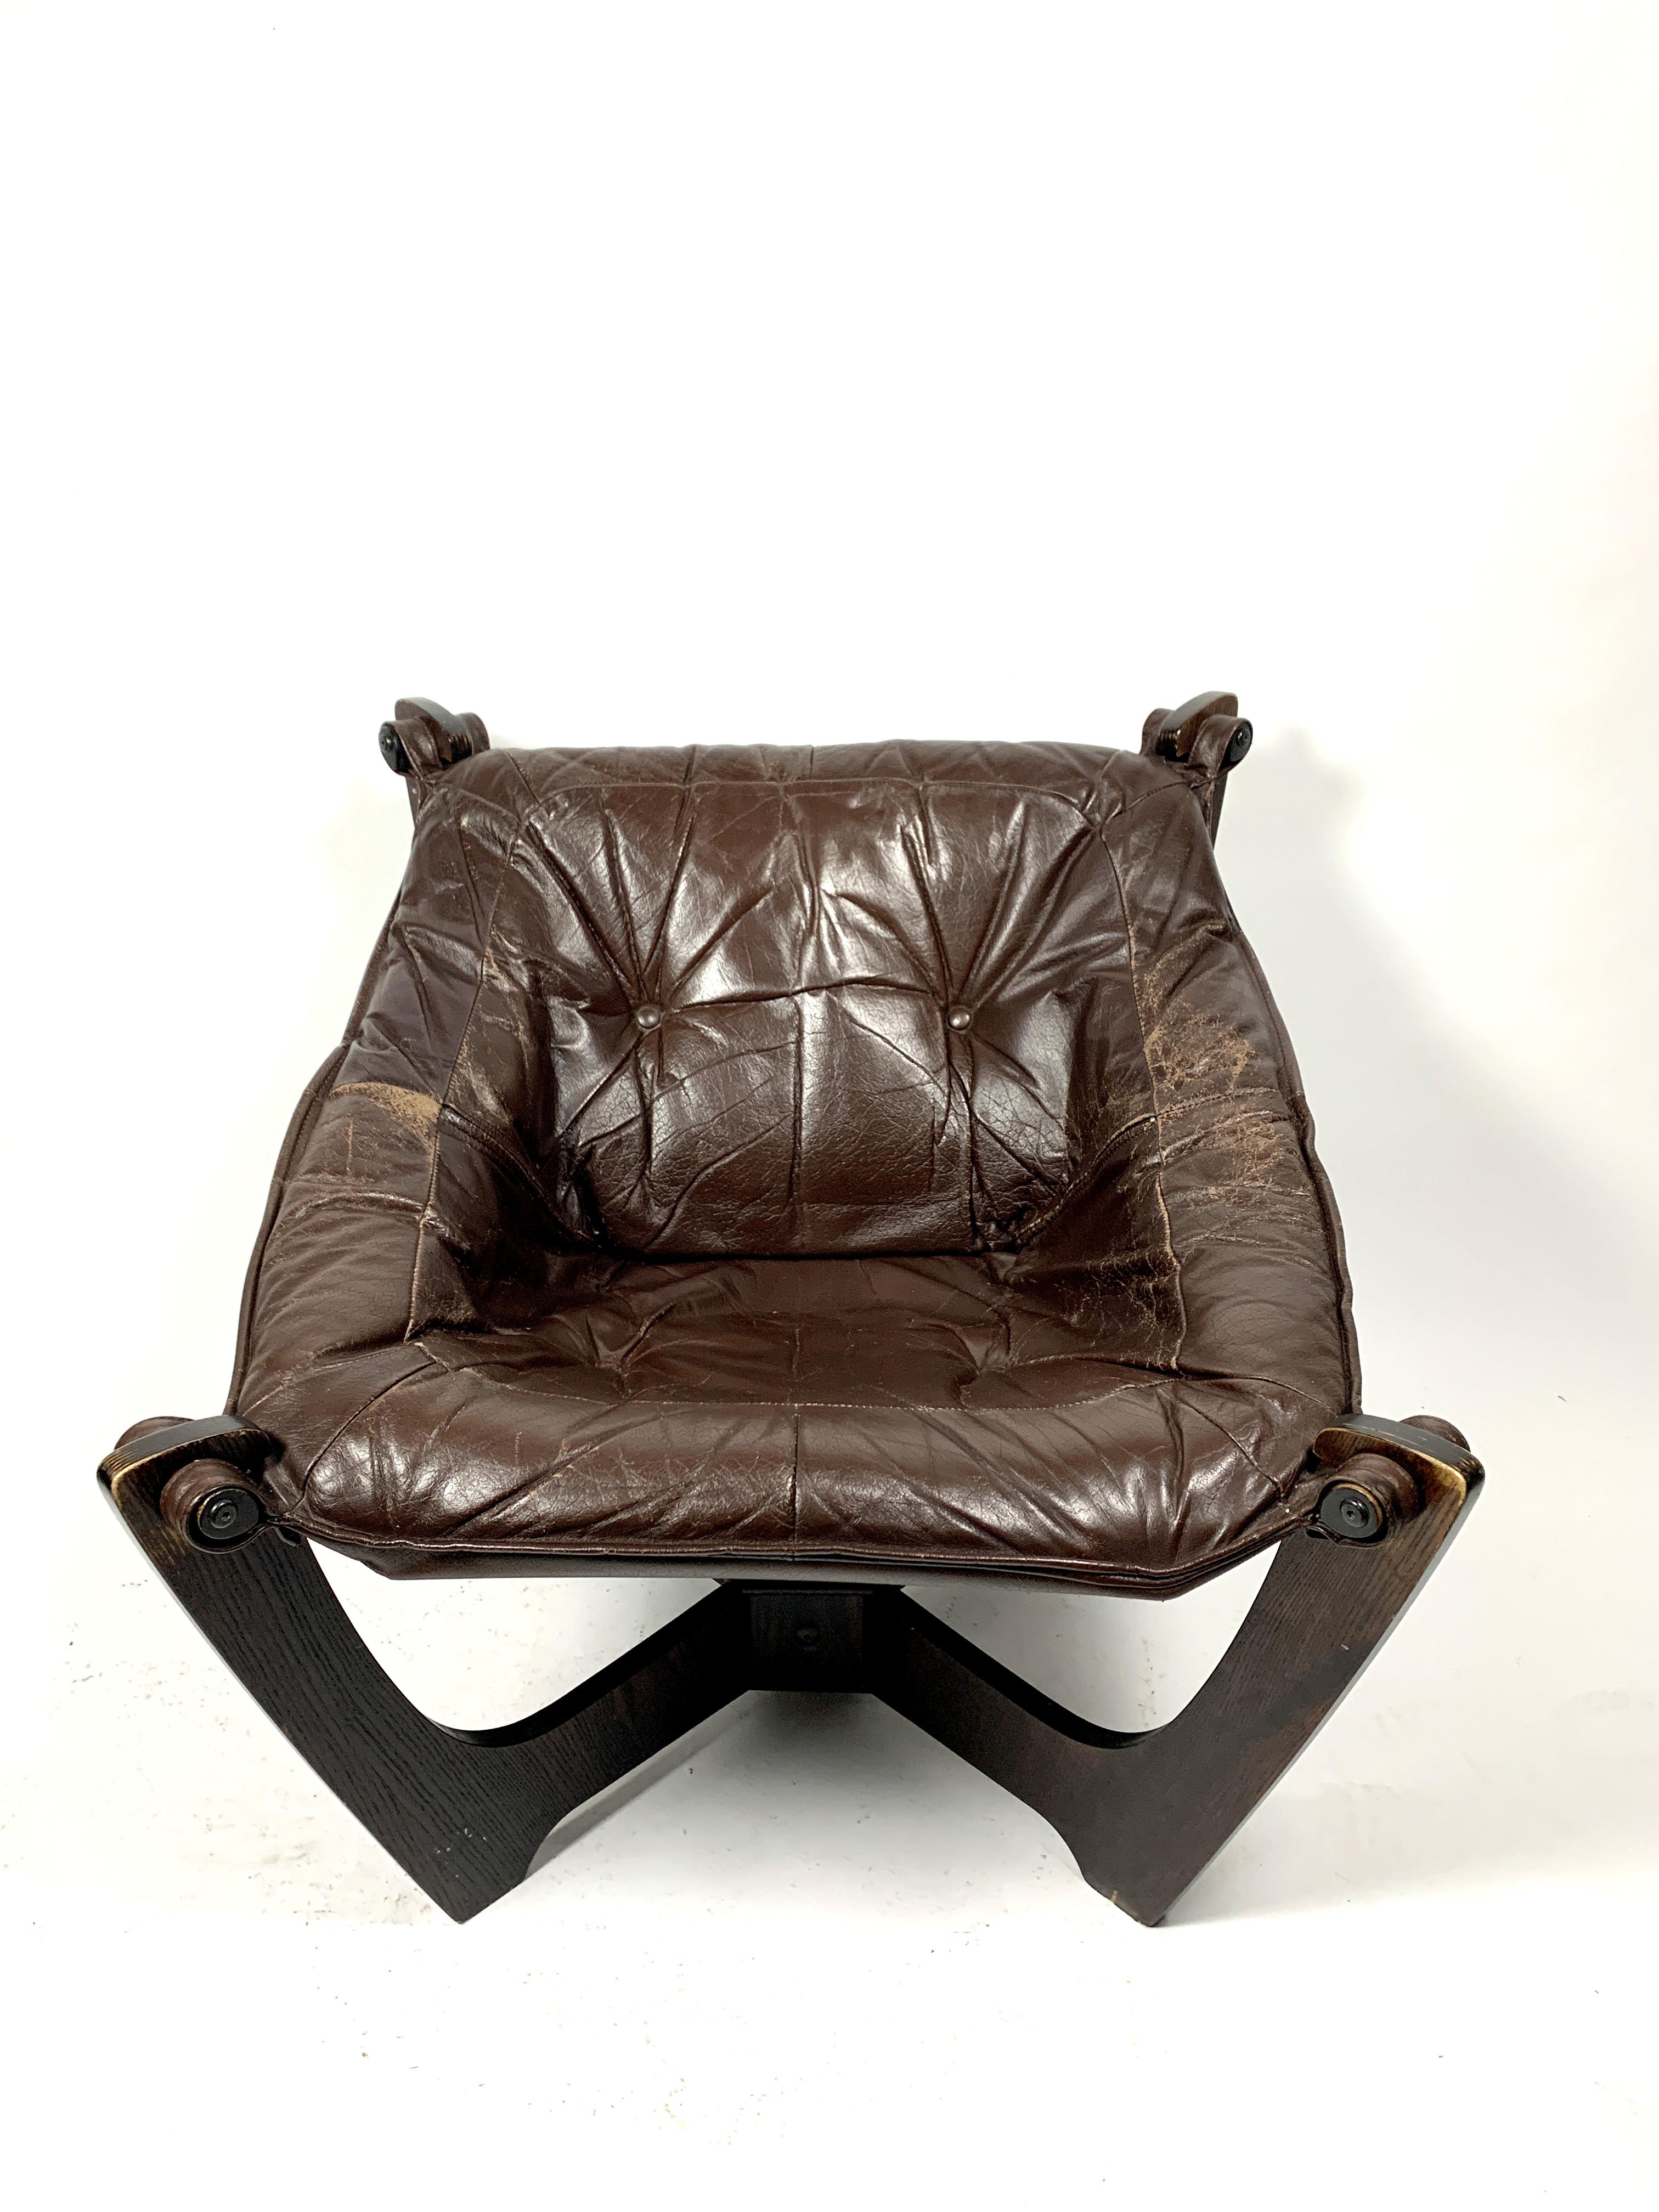 A 1970s design Classic from designer Odd Knutsen , this leather cushion and plywood base armchair is in generally good condition.
This piece is a well-known design that is well documented in general design literature.
This vintage item remains